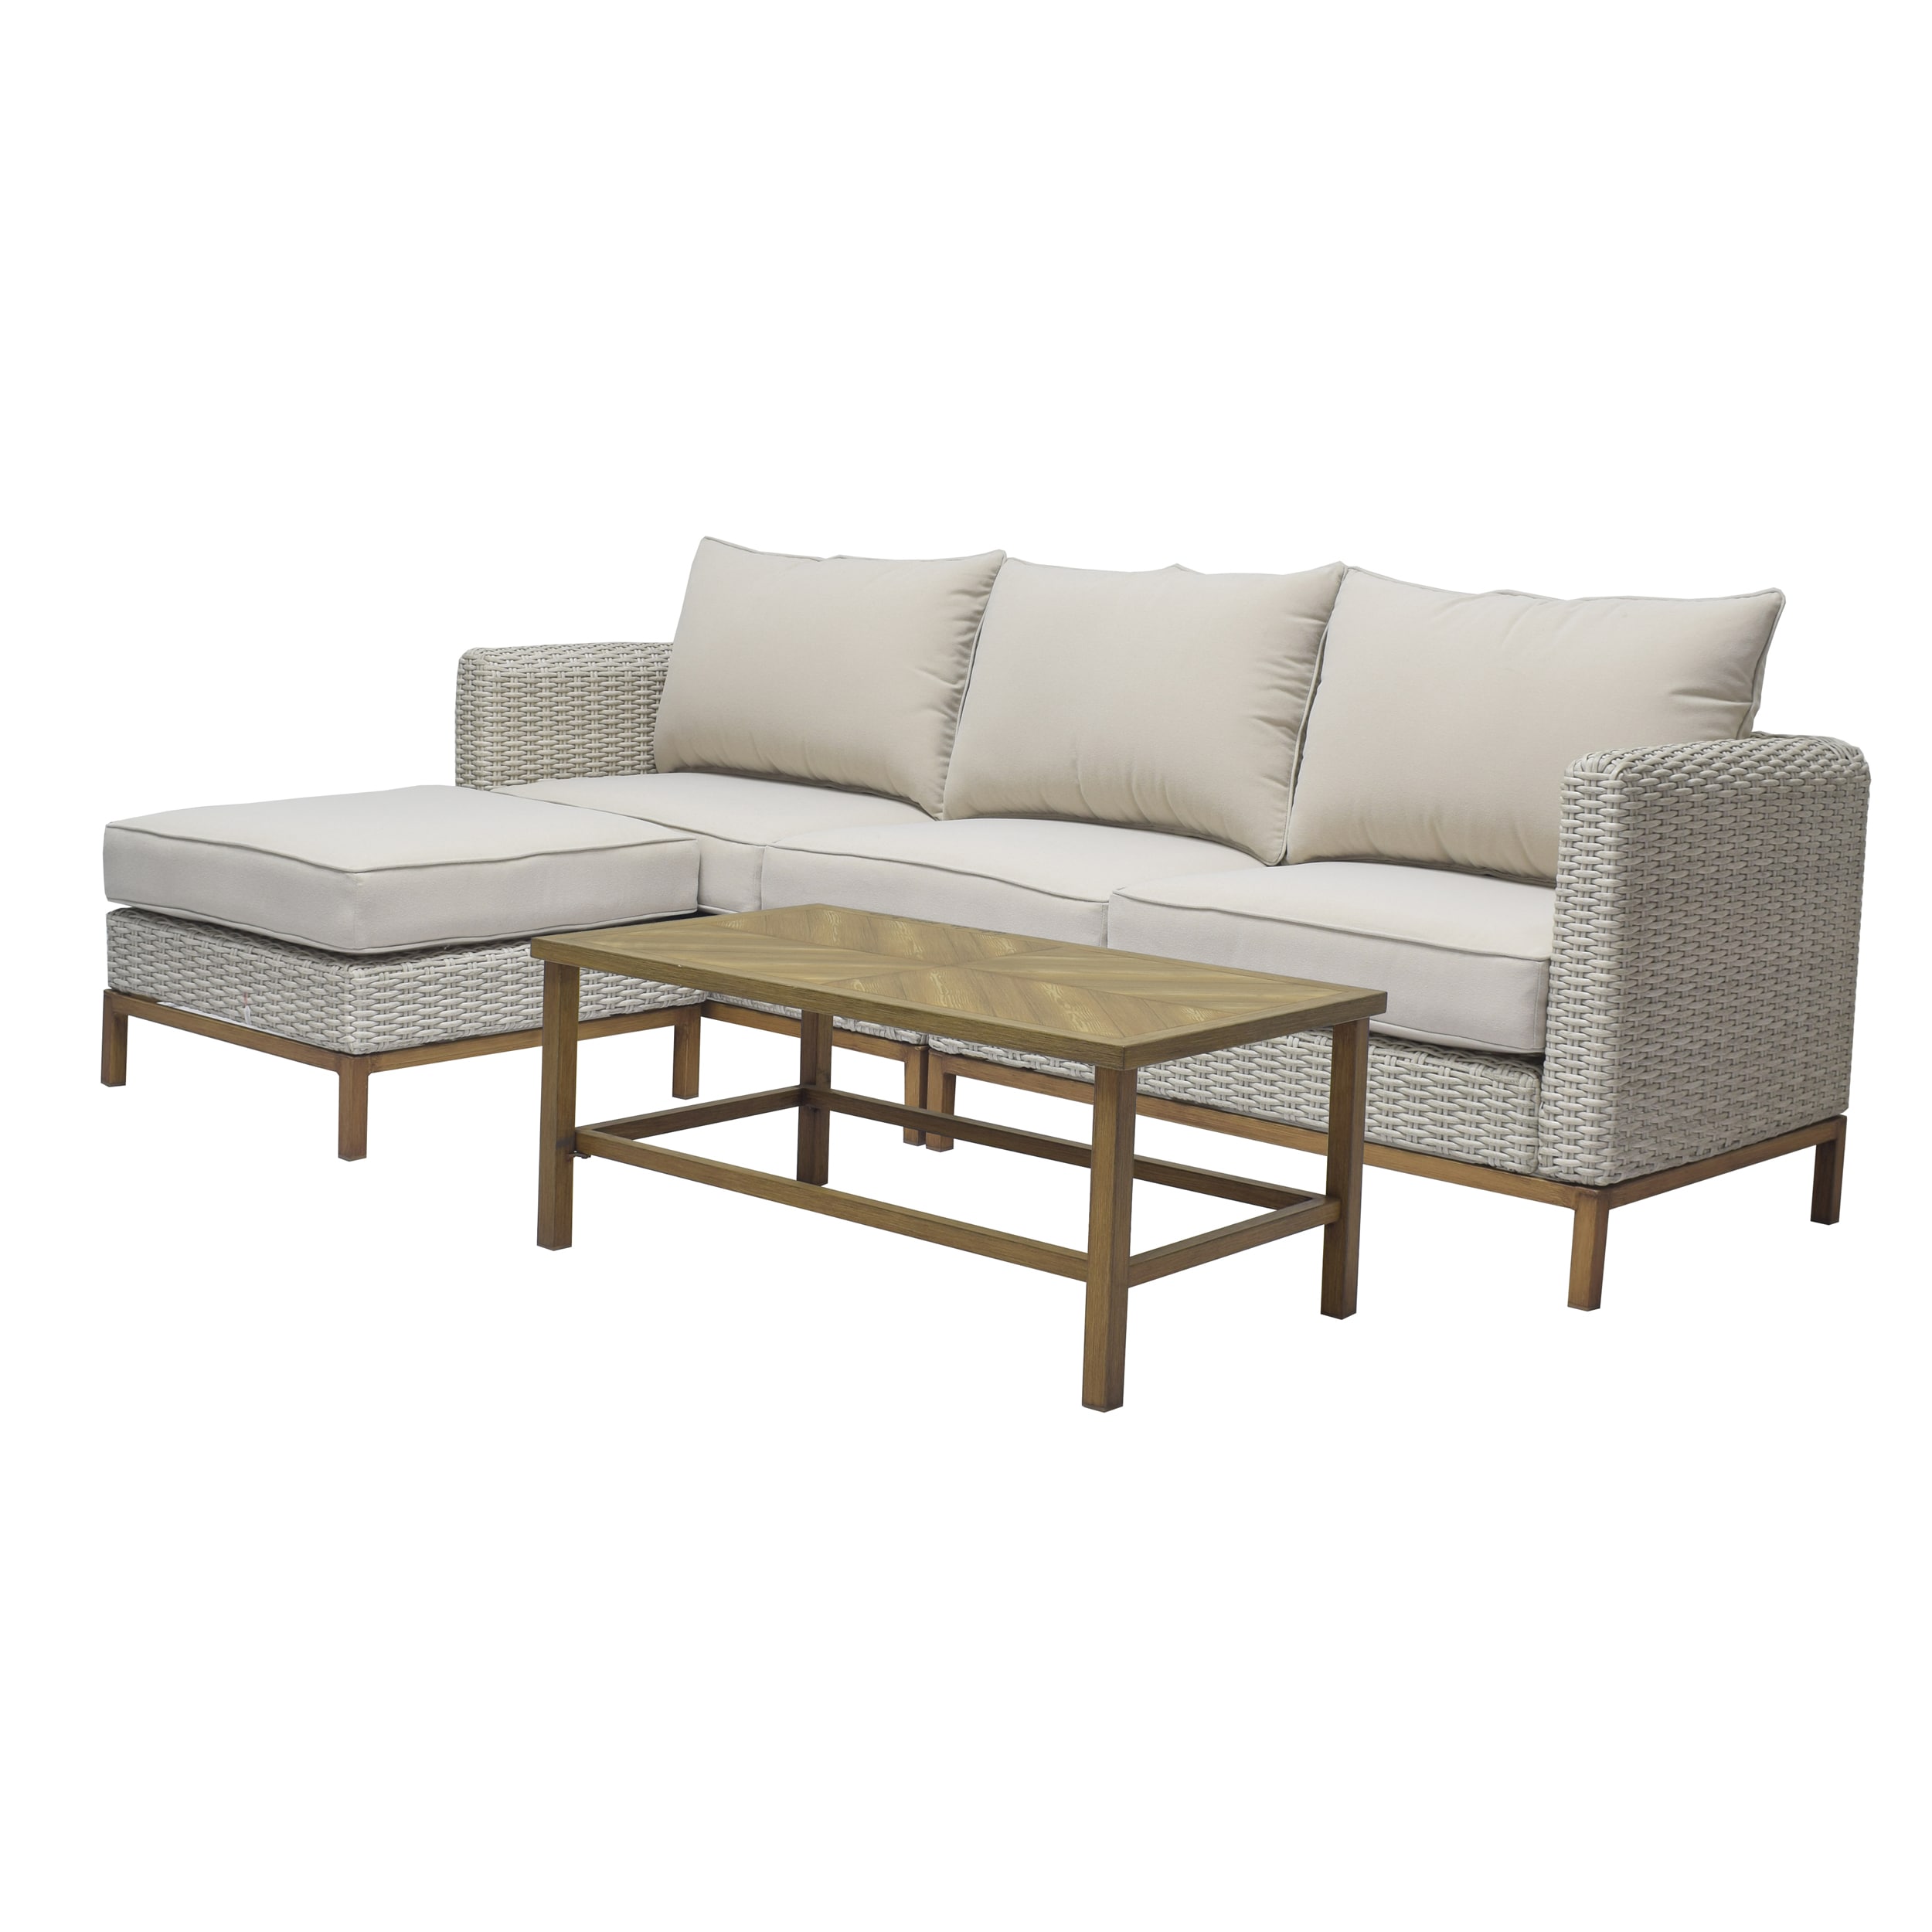 Origin 21 Veda Wicker Off-white with Patio Springs Cushions the at 4-Piece Set Sets Conversation Patio in Conversation department